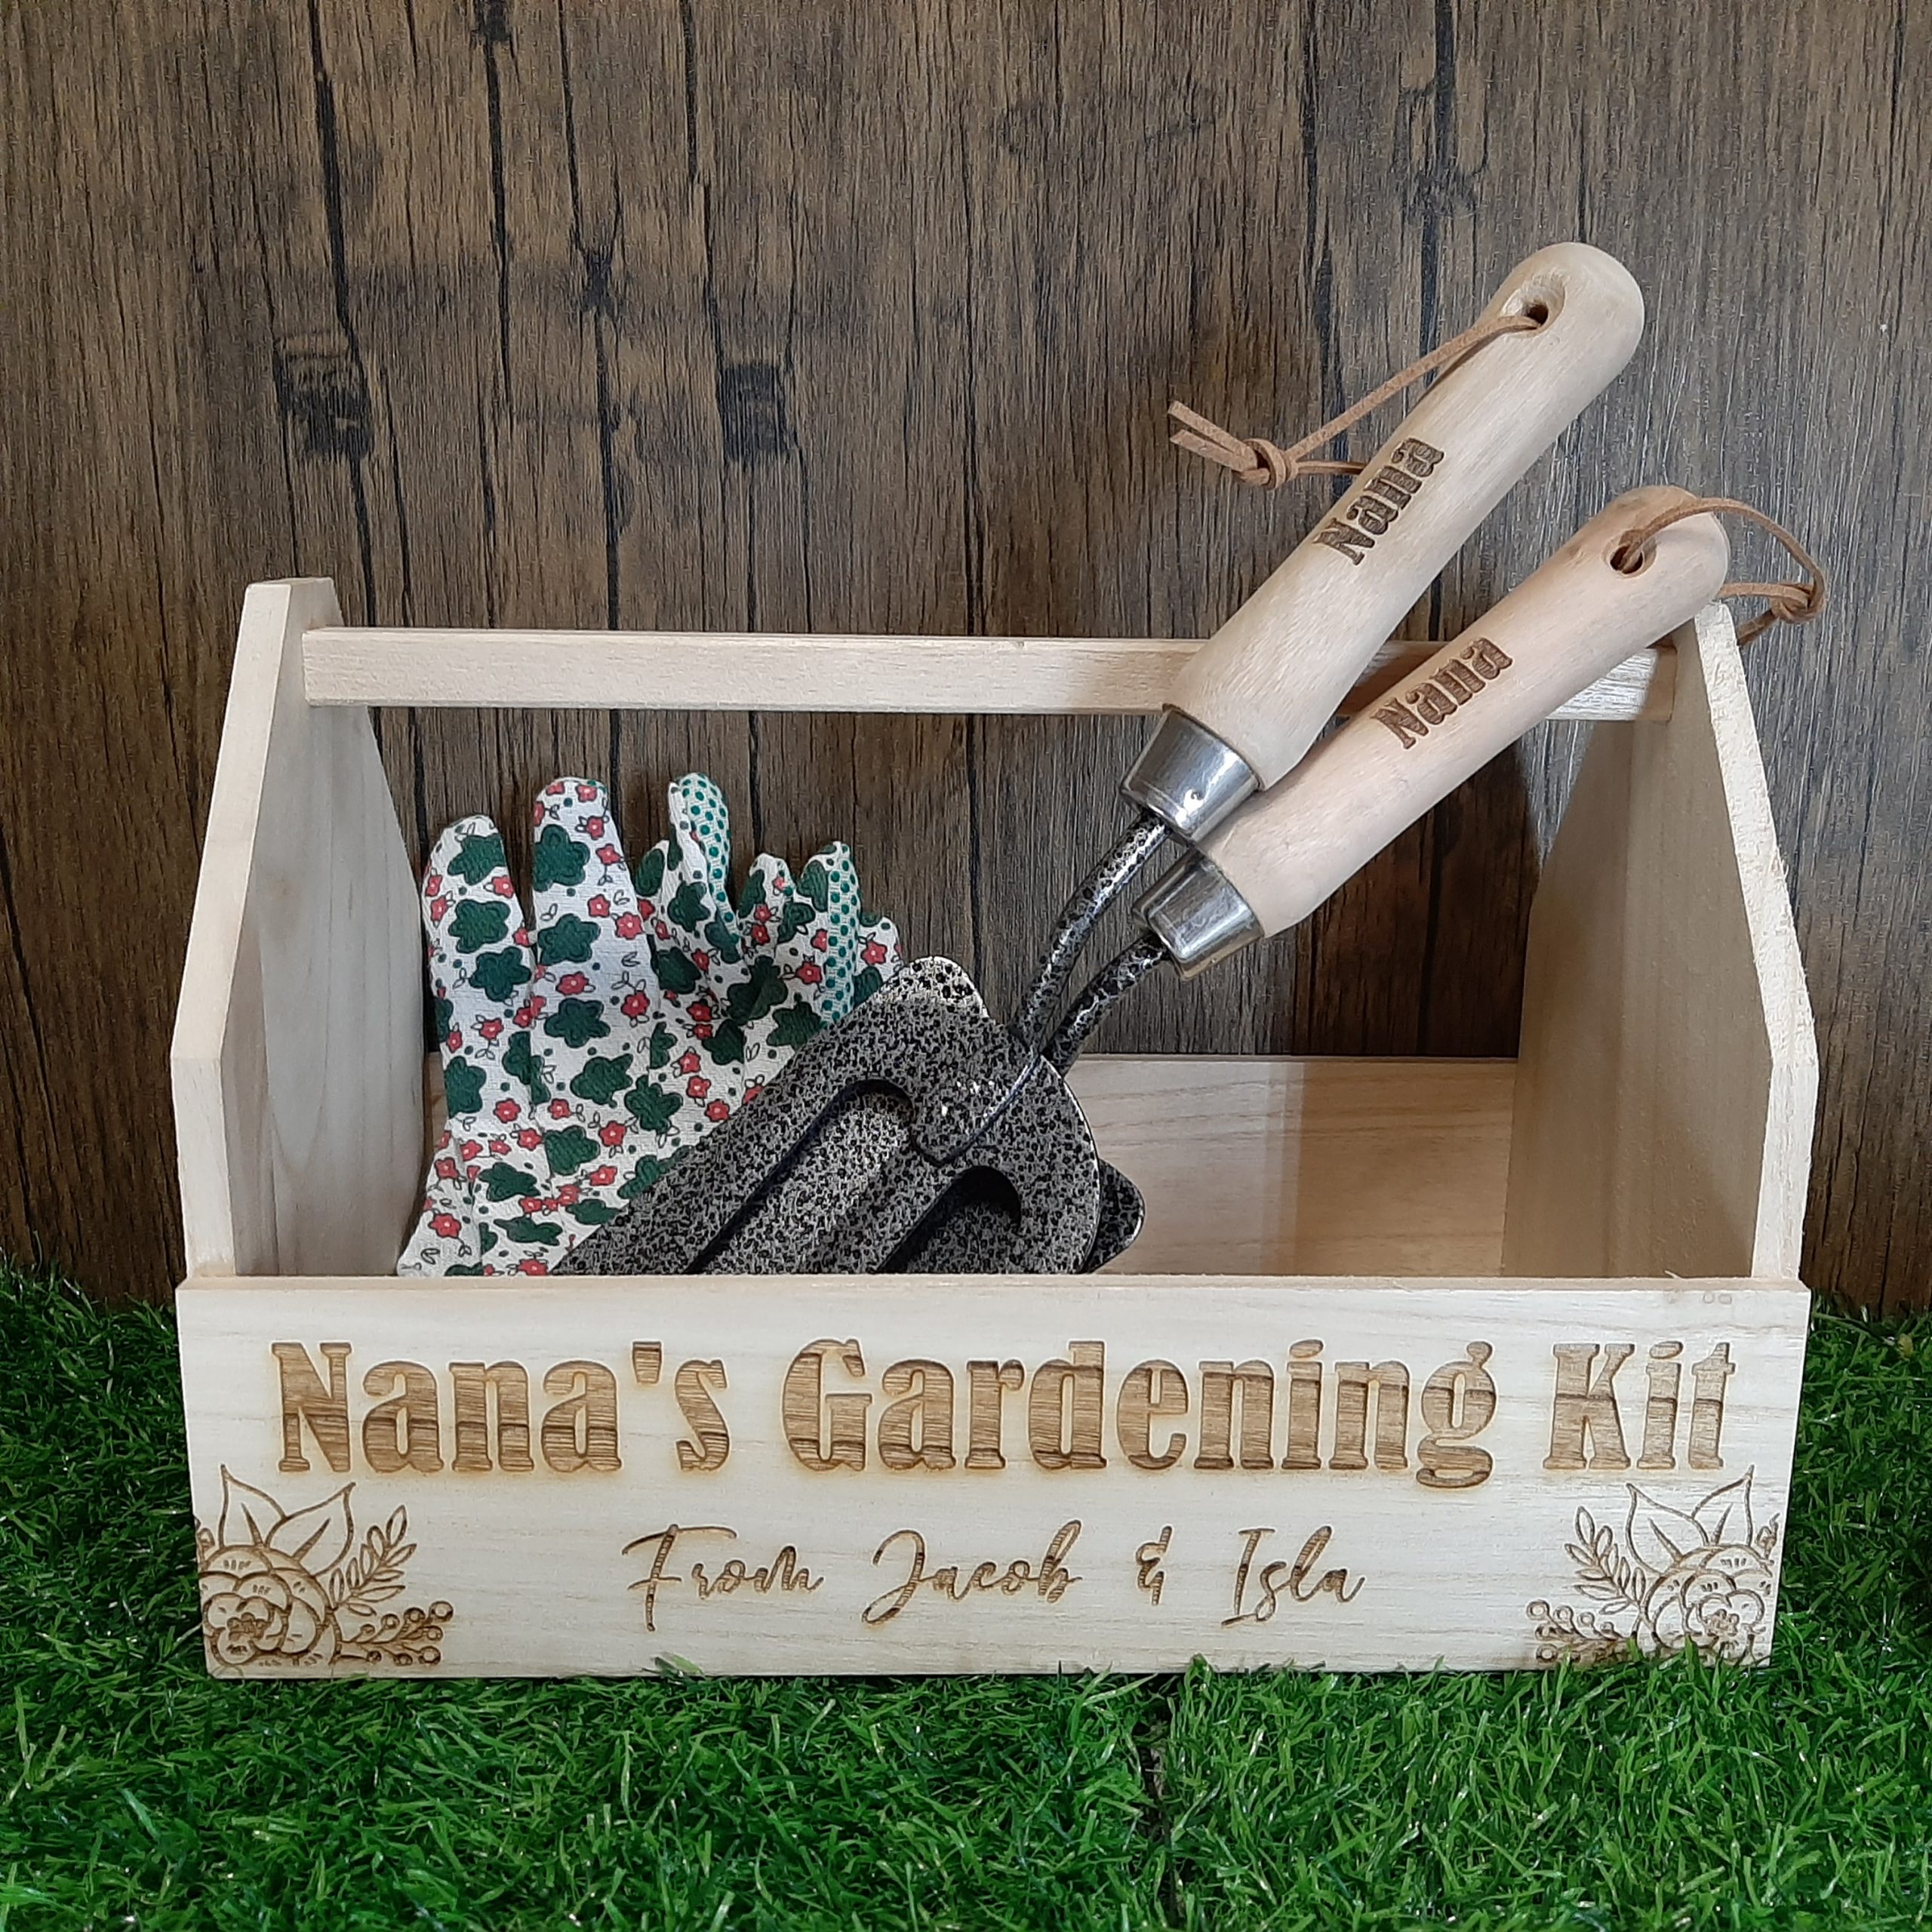 Gardening kit with laser engraved name and personal message comes with names on fork and spades